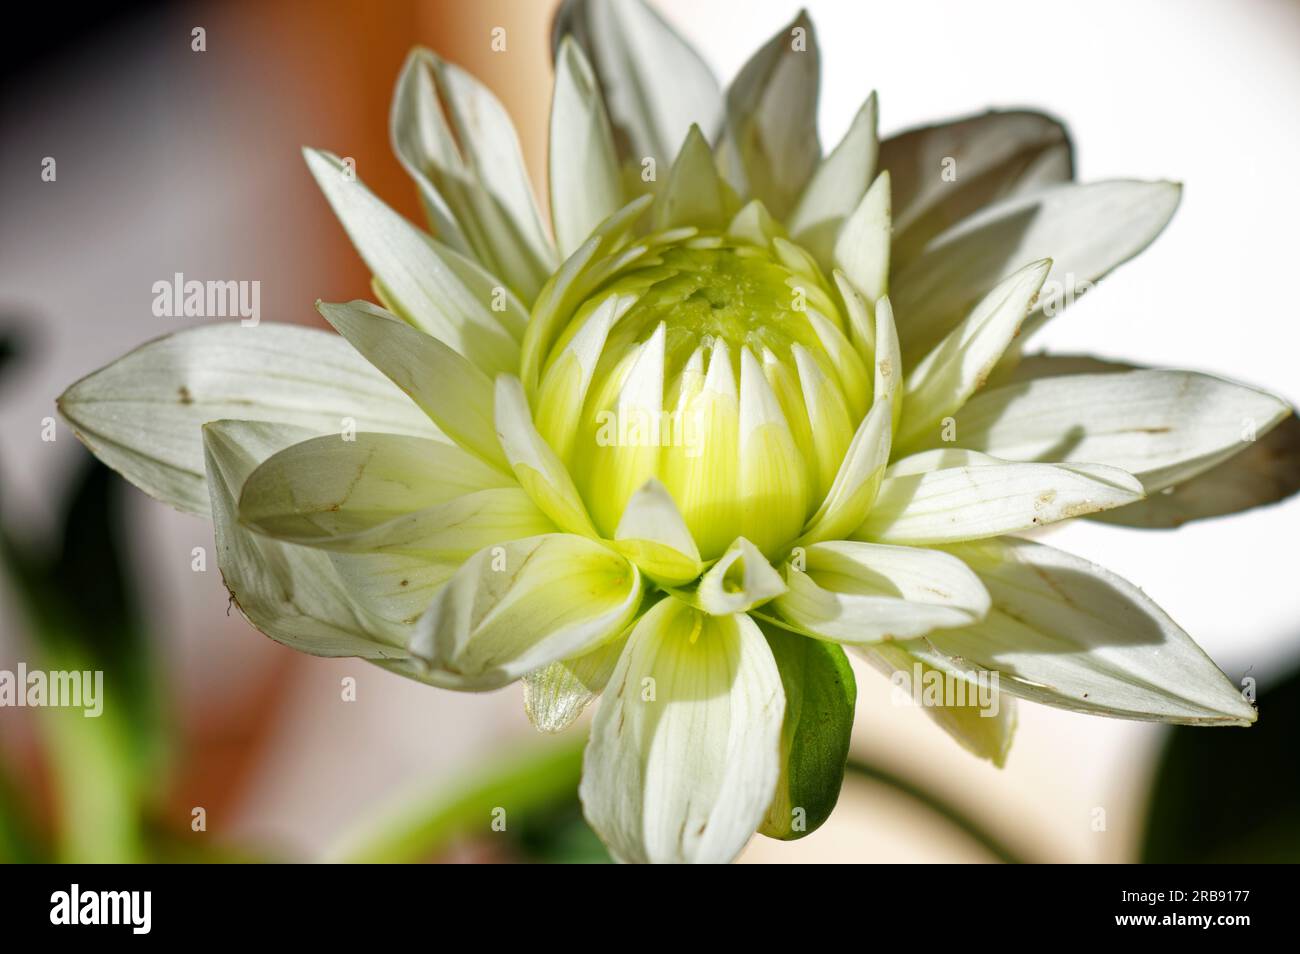 Garden, flowers and blossoms: Isolated flower of a dahlia Stock Photo